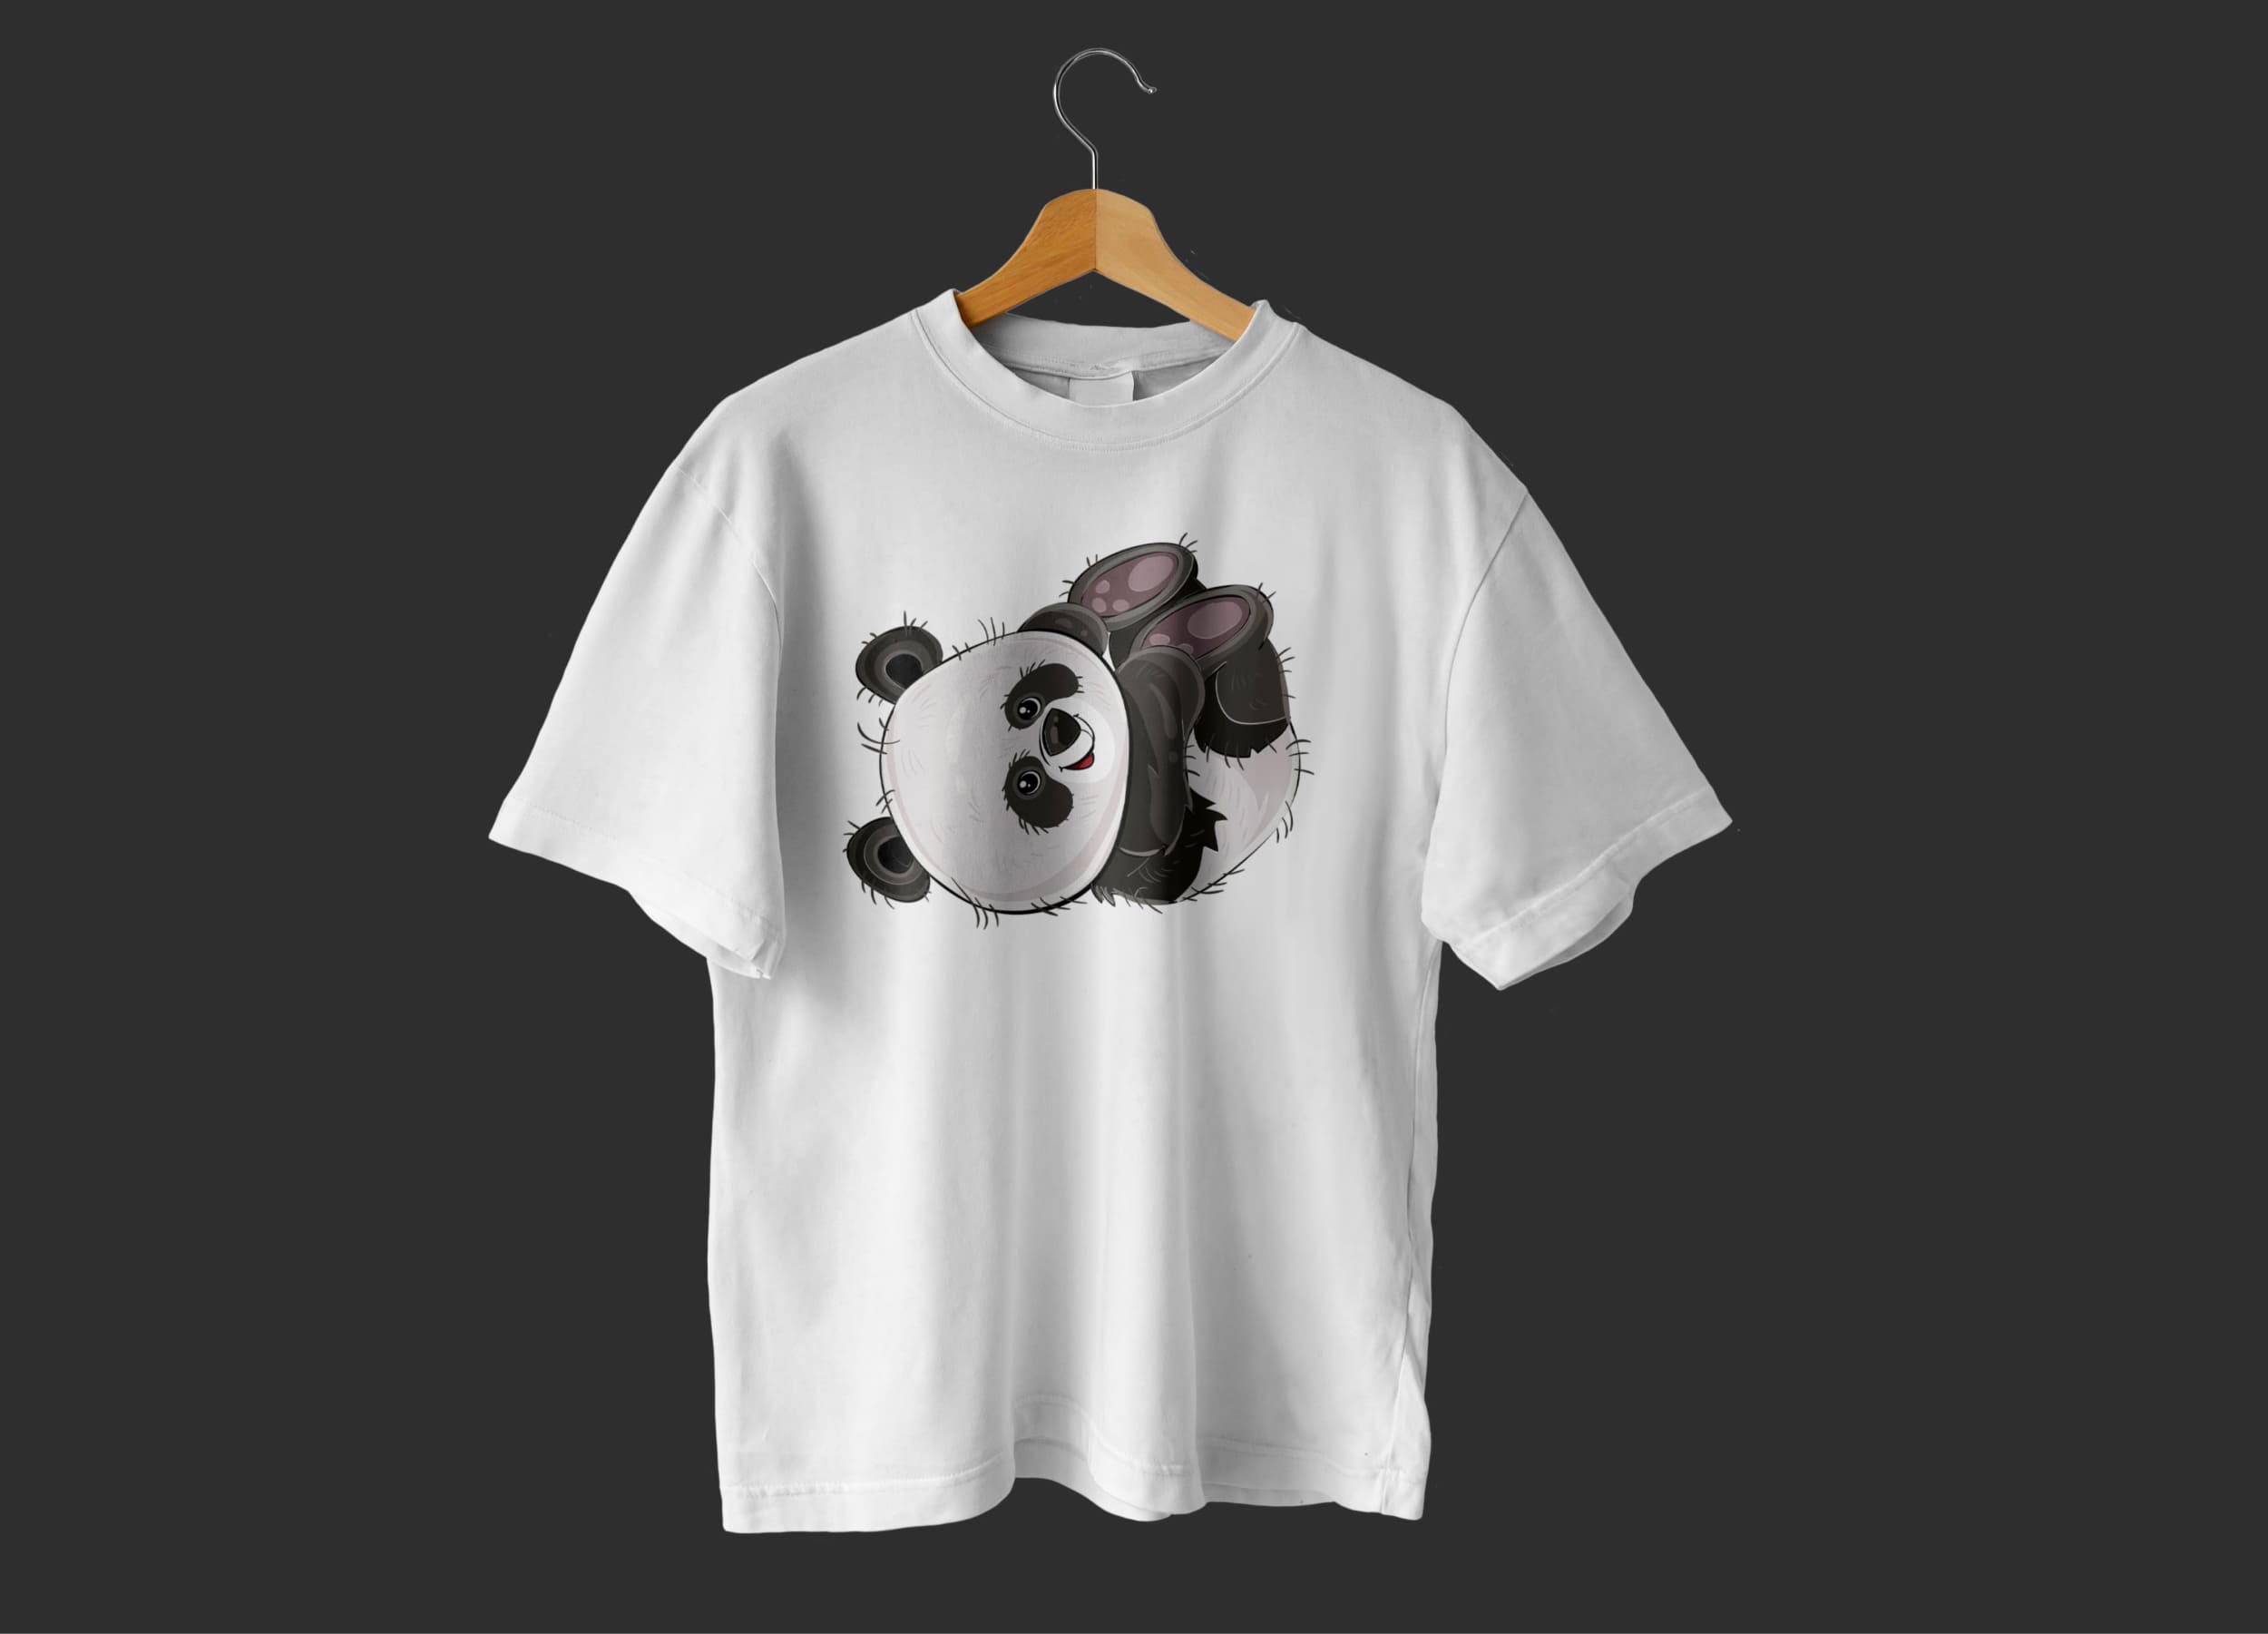 White t-shirt with cute baby panda on a wooden hanger on a dark gray background.